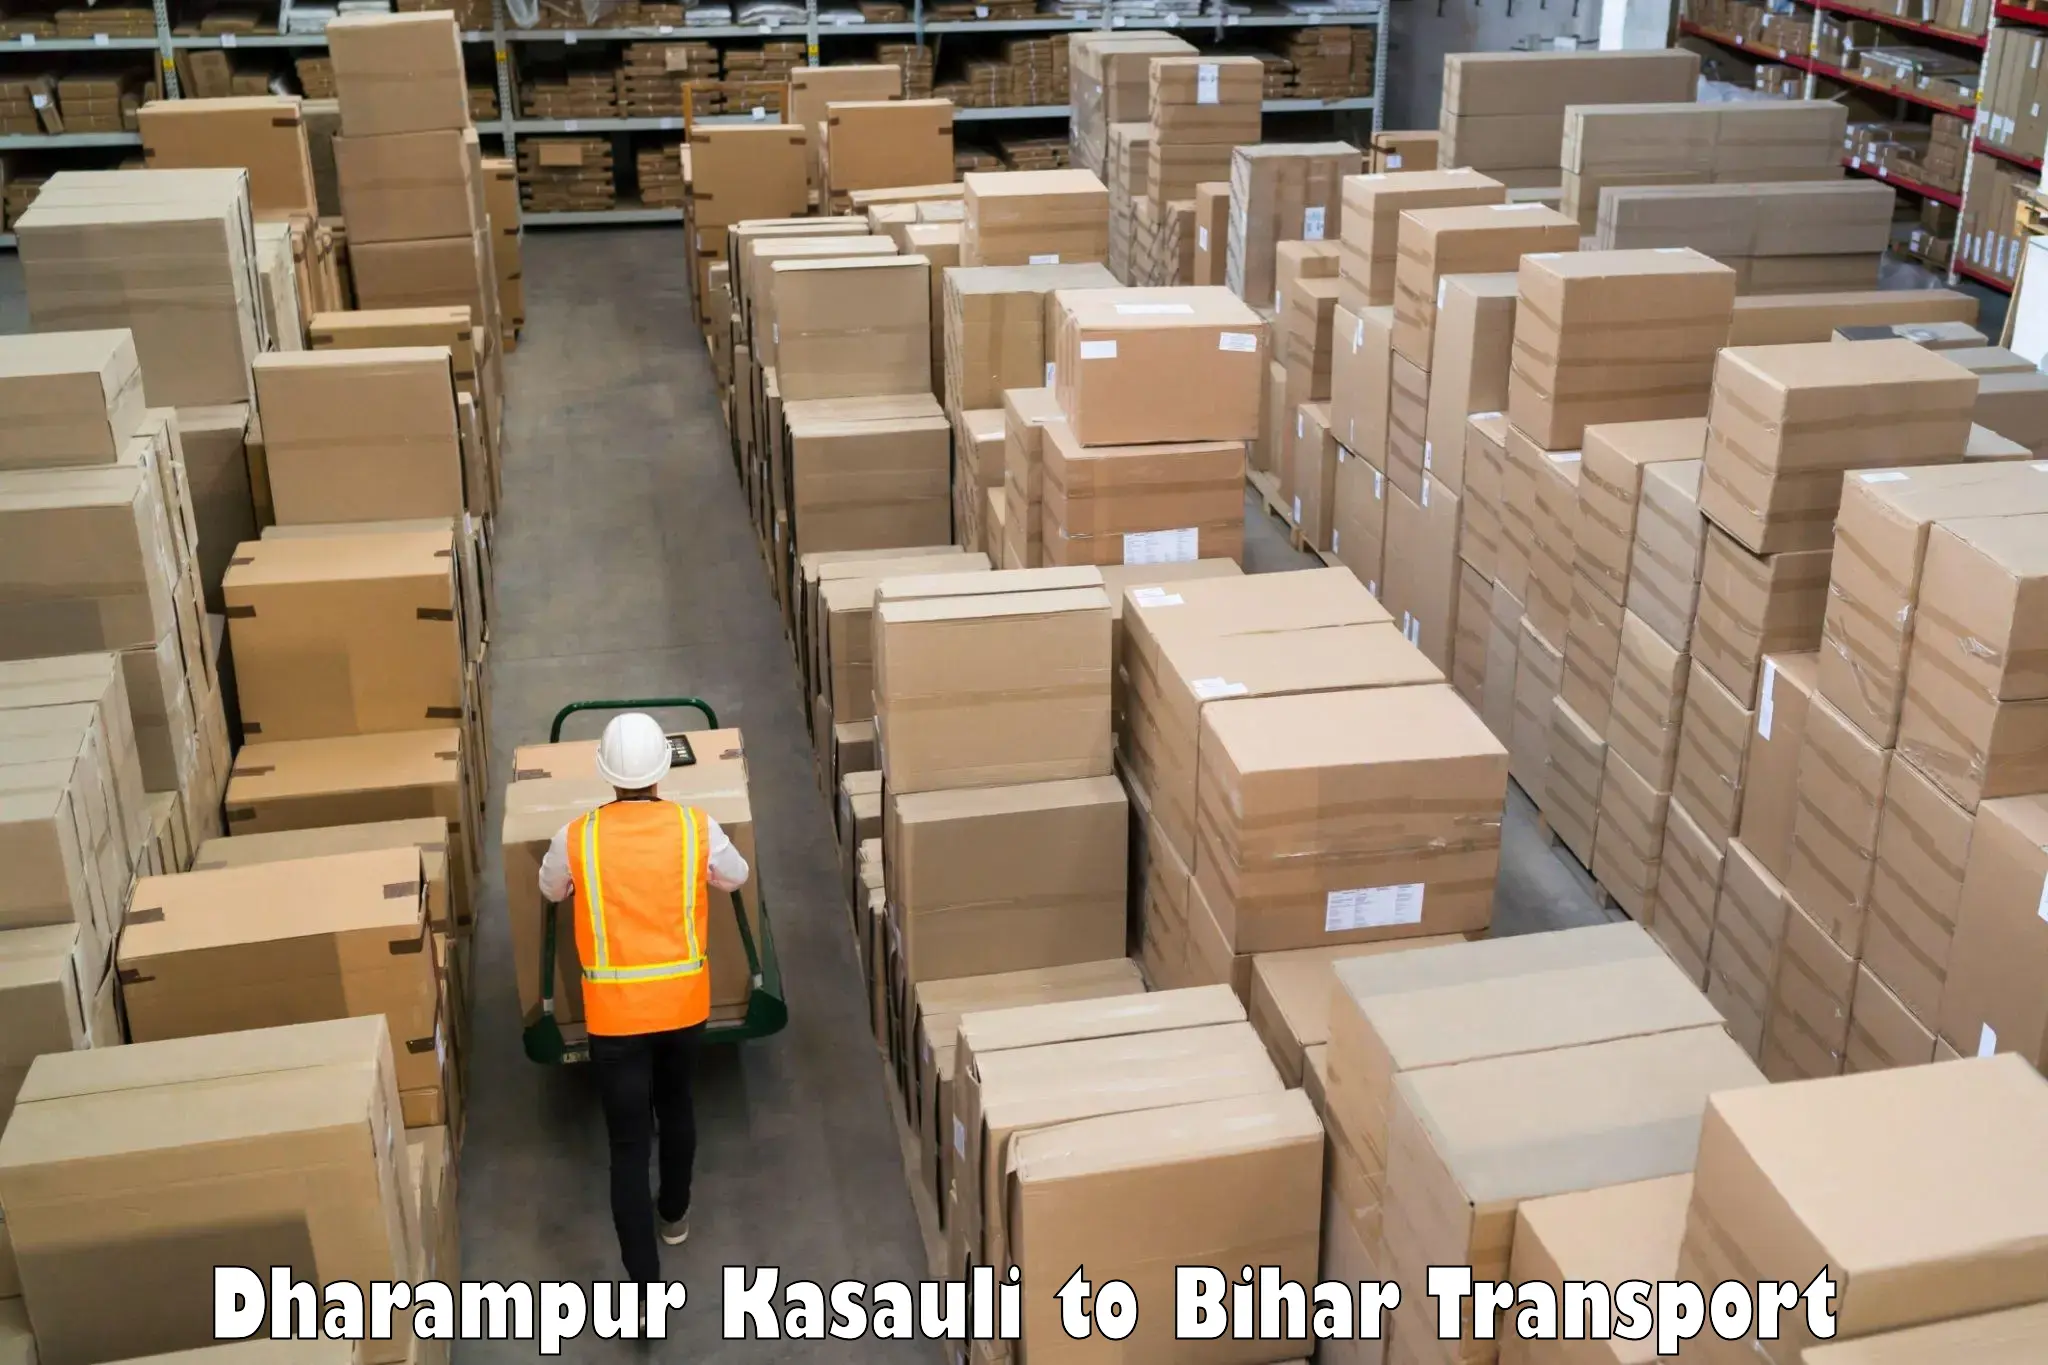 Air freight transport services in Dharampur Kasauli to Sirdala